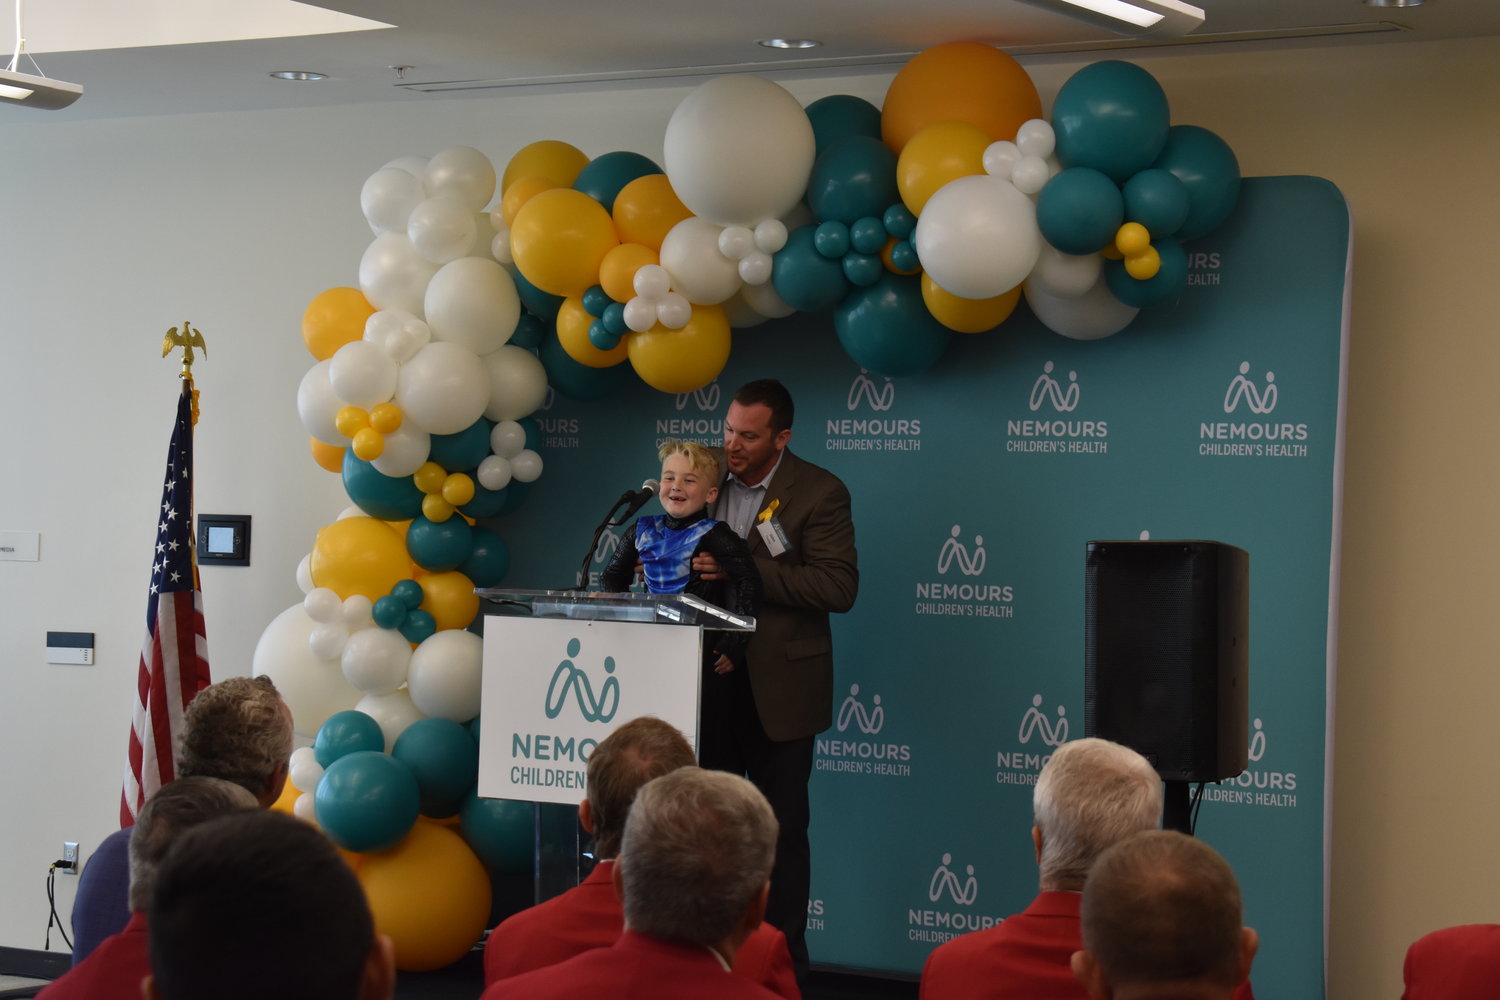 John Fischer holds up his son Rhett to say a few words to the crowd during the press conference.